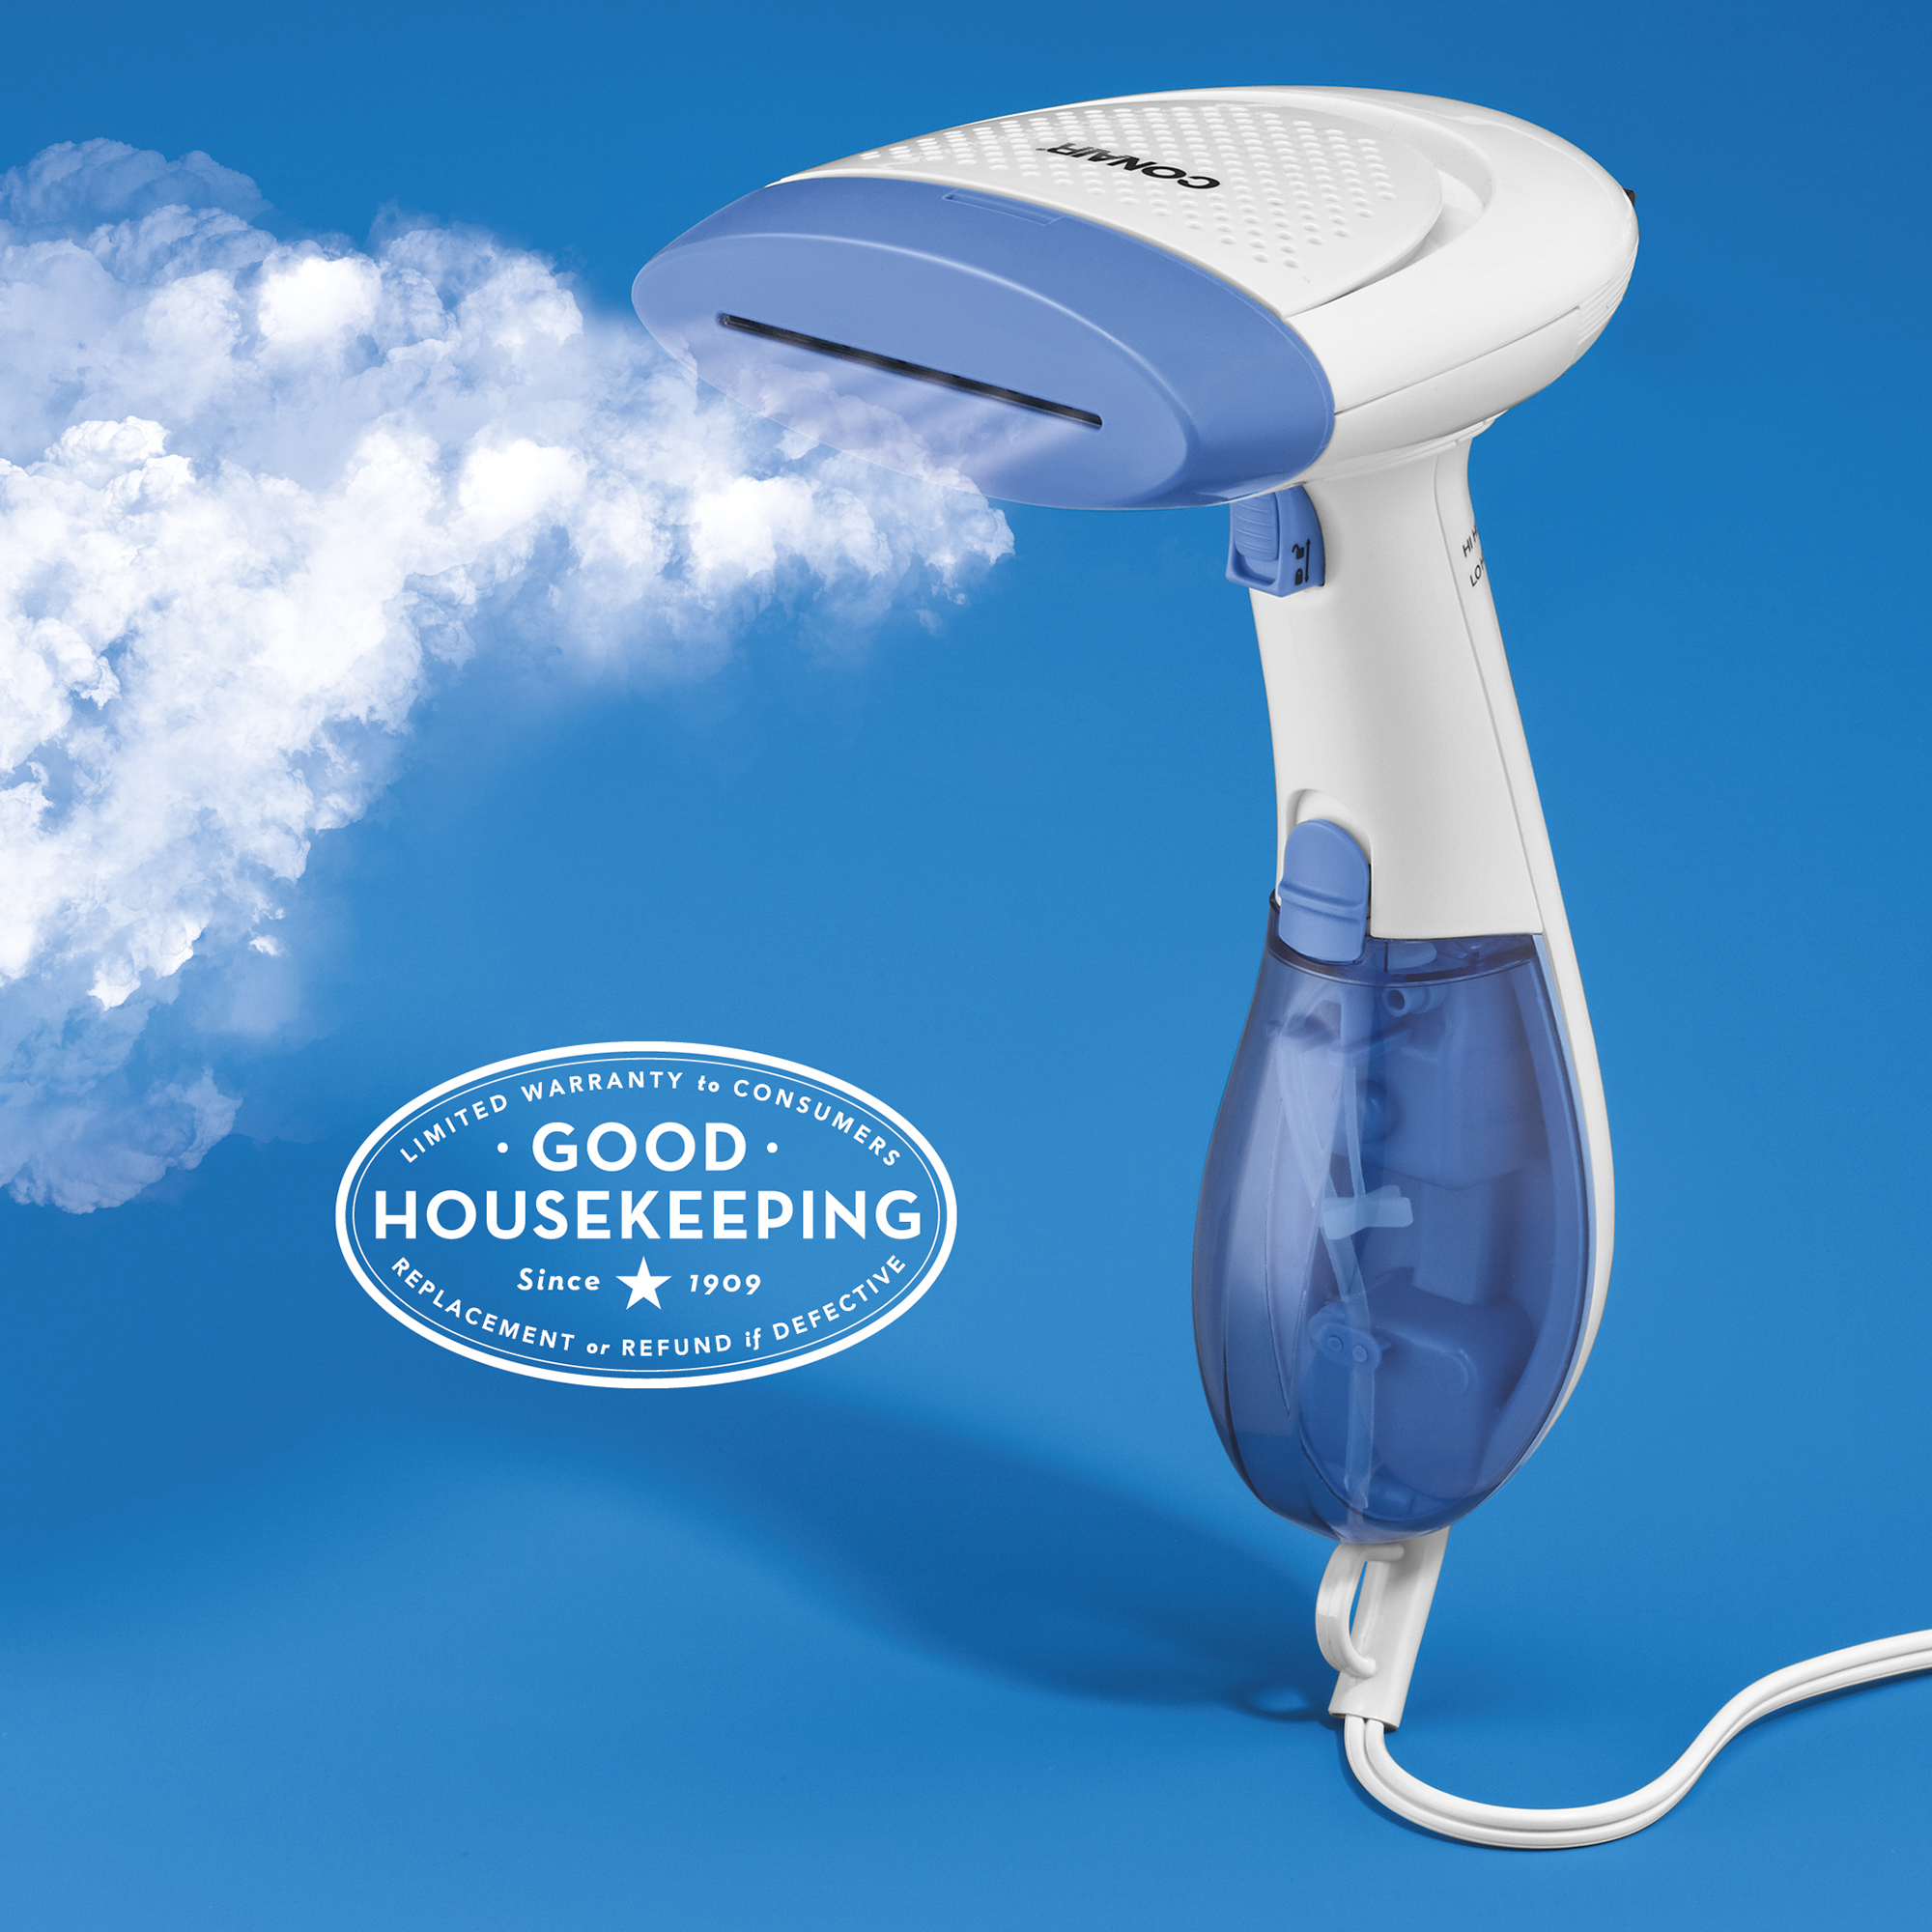 Conair Handheld Garment Steamer for Clothes, ExtremeSteam 1200W, Portable Handheld Design, White/Blue, GS237X - image 4 of 13